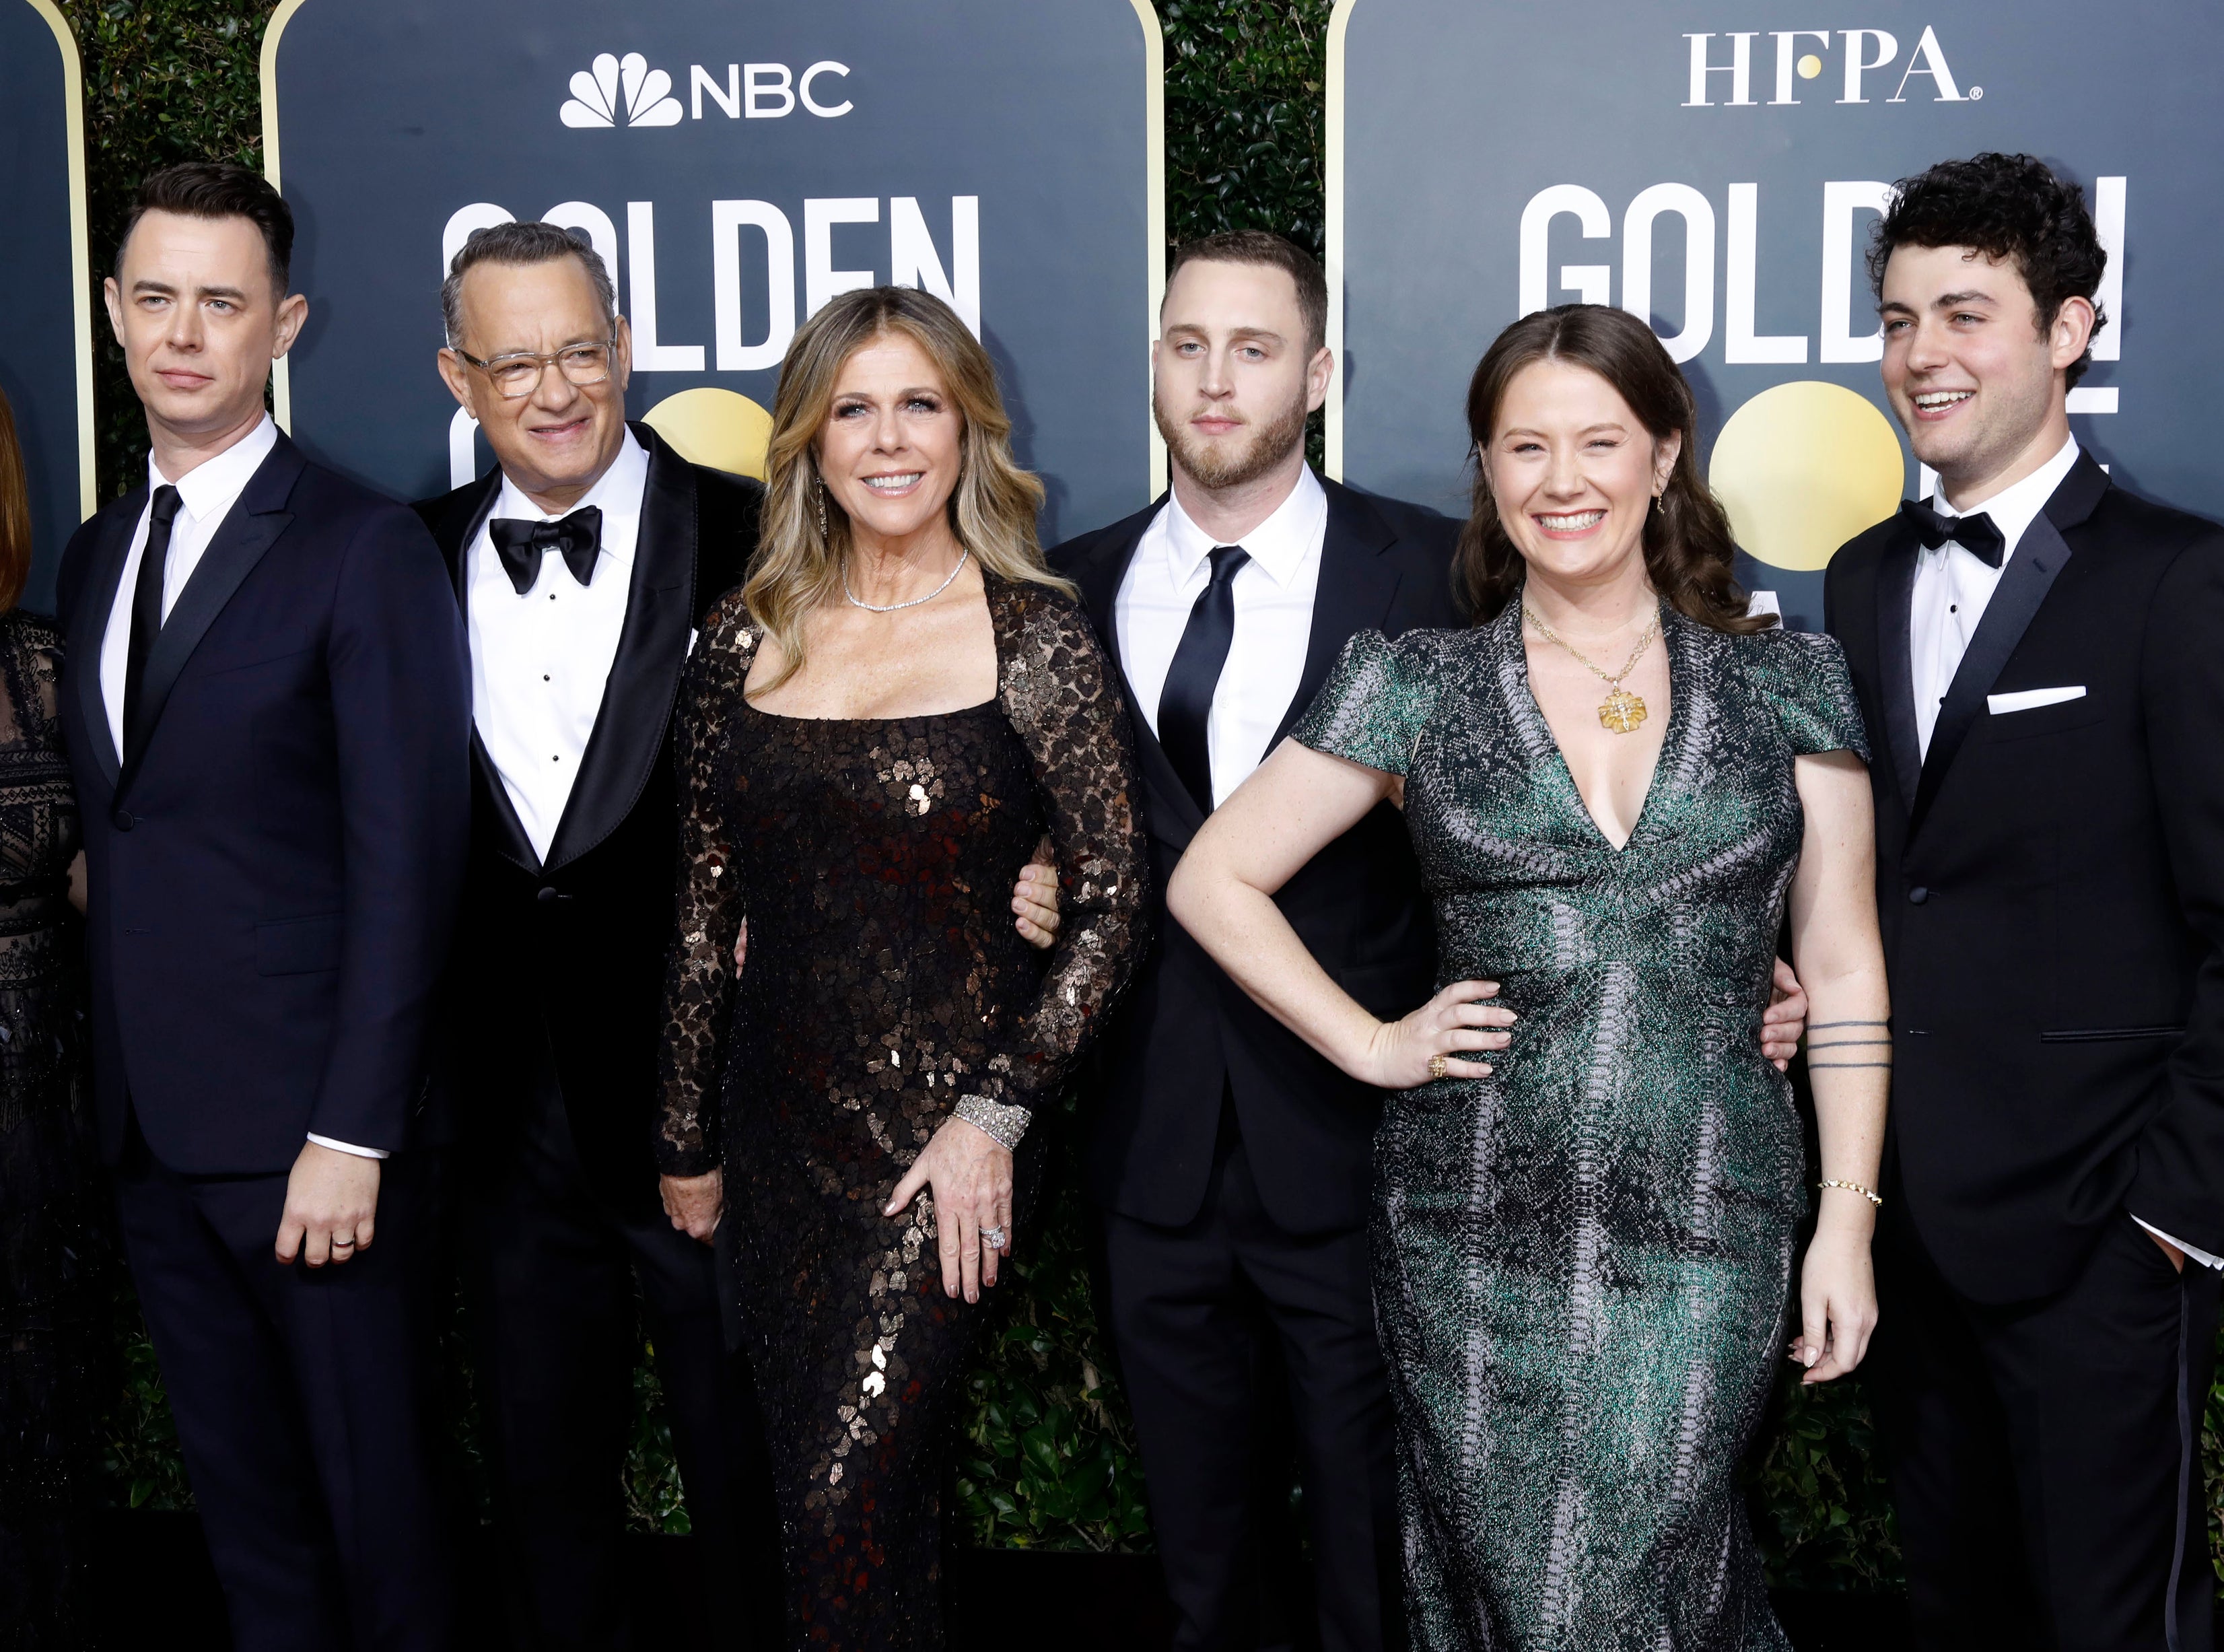 the Hanks family posing together on the red carpet at the Golden Globes